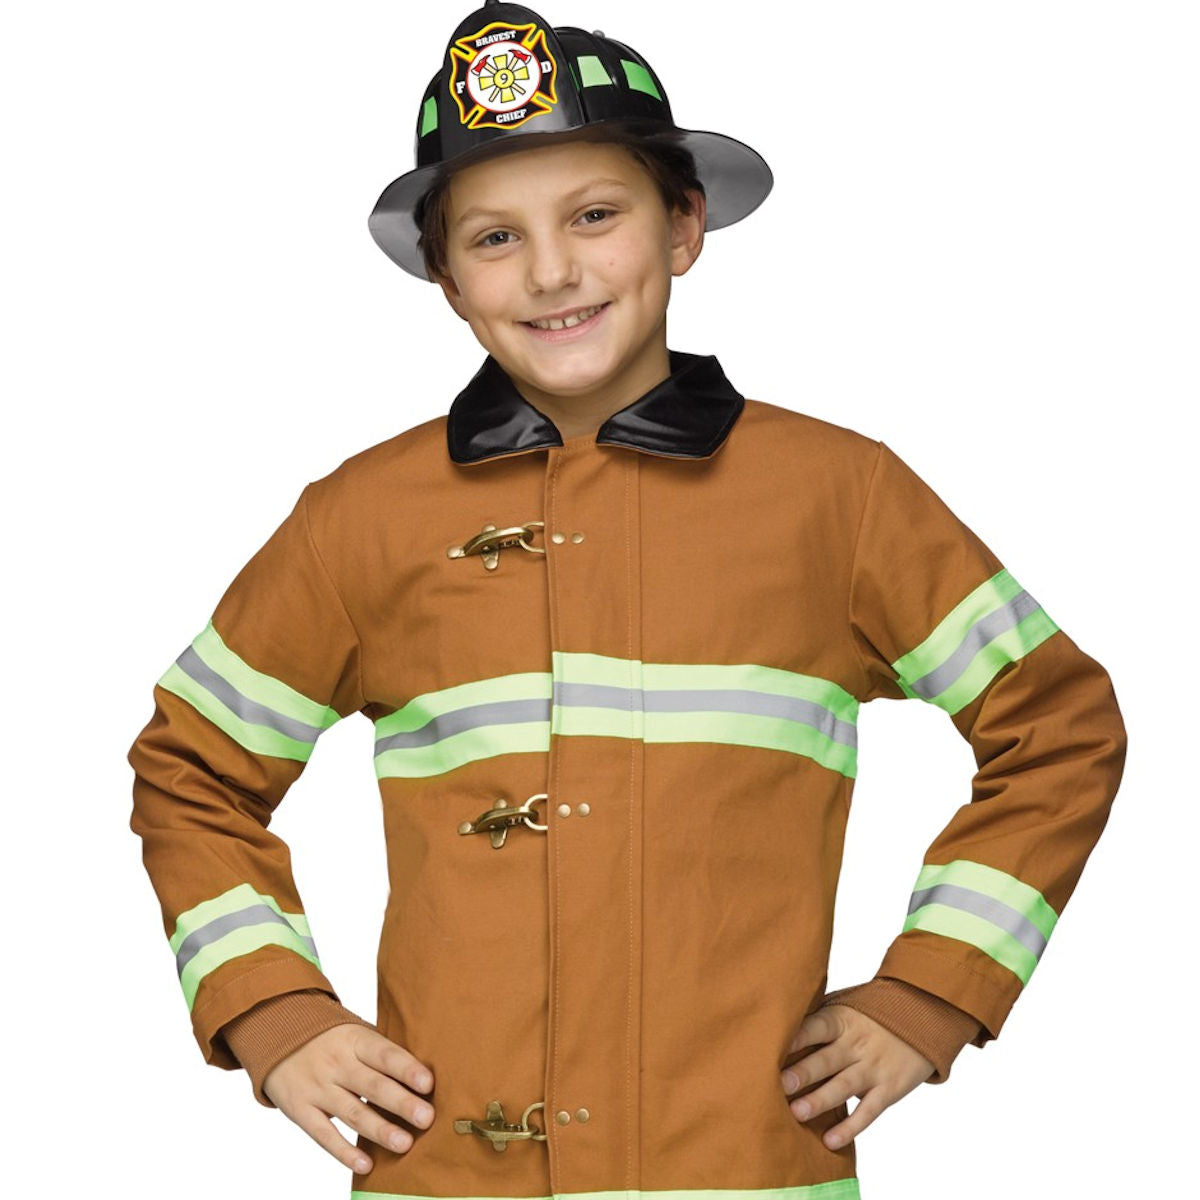 Fireman Deluxe Boy's Costume Authentic Licensed Issue